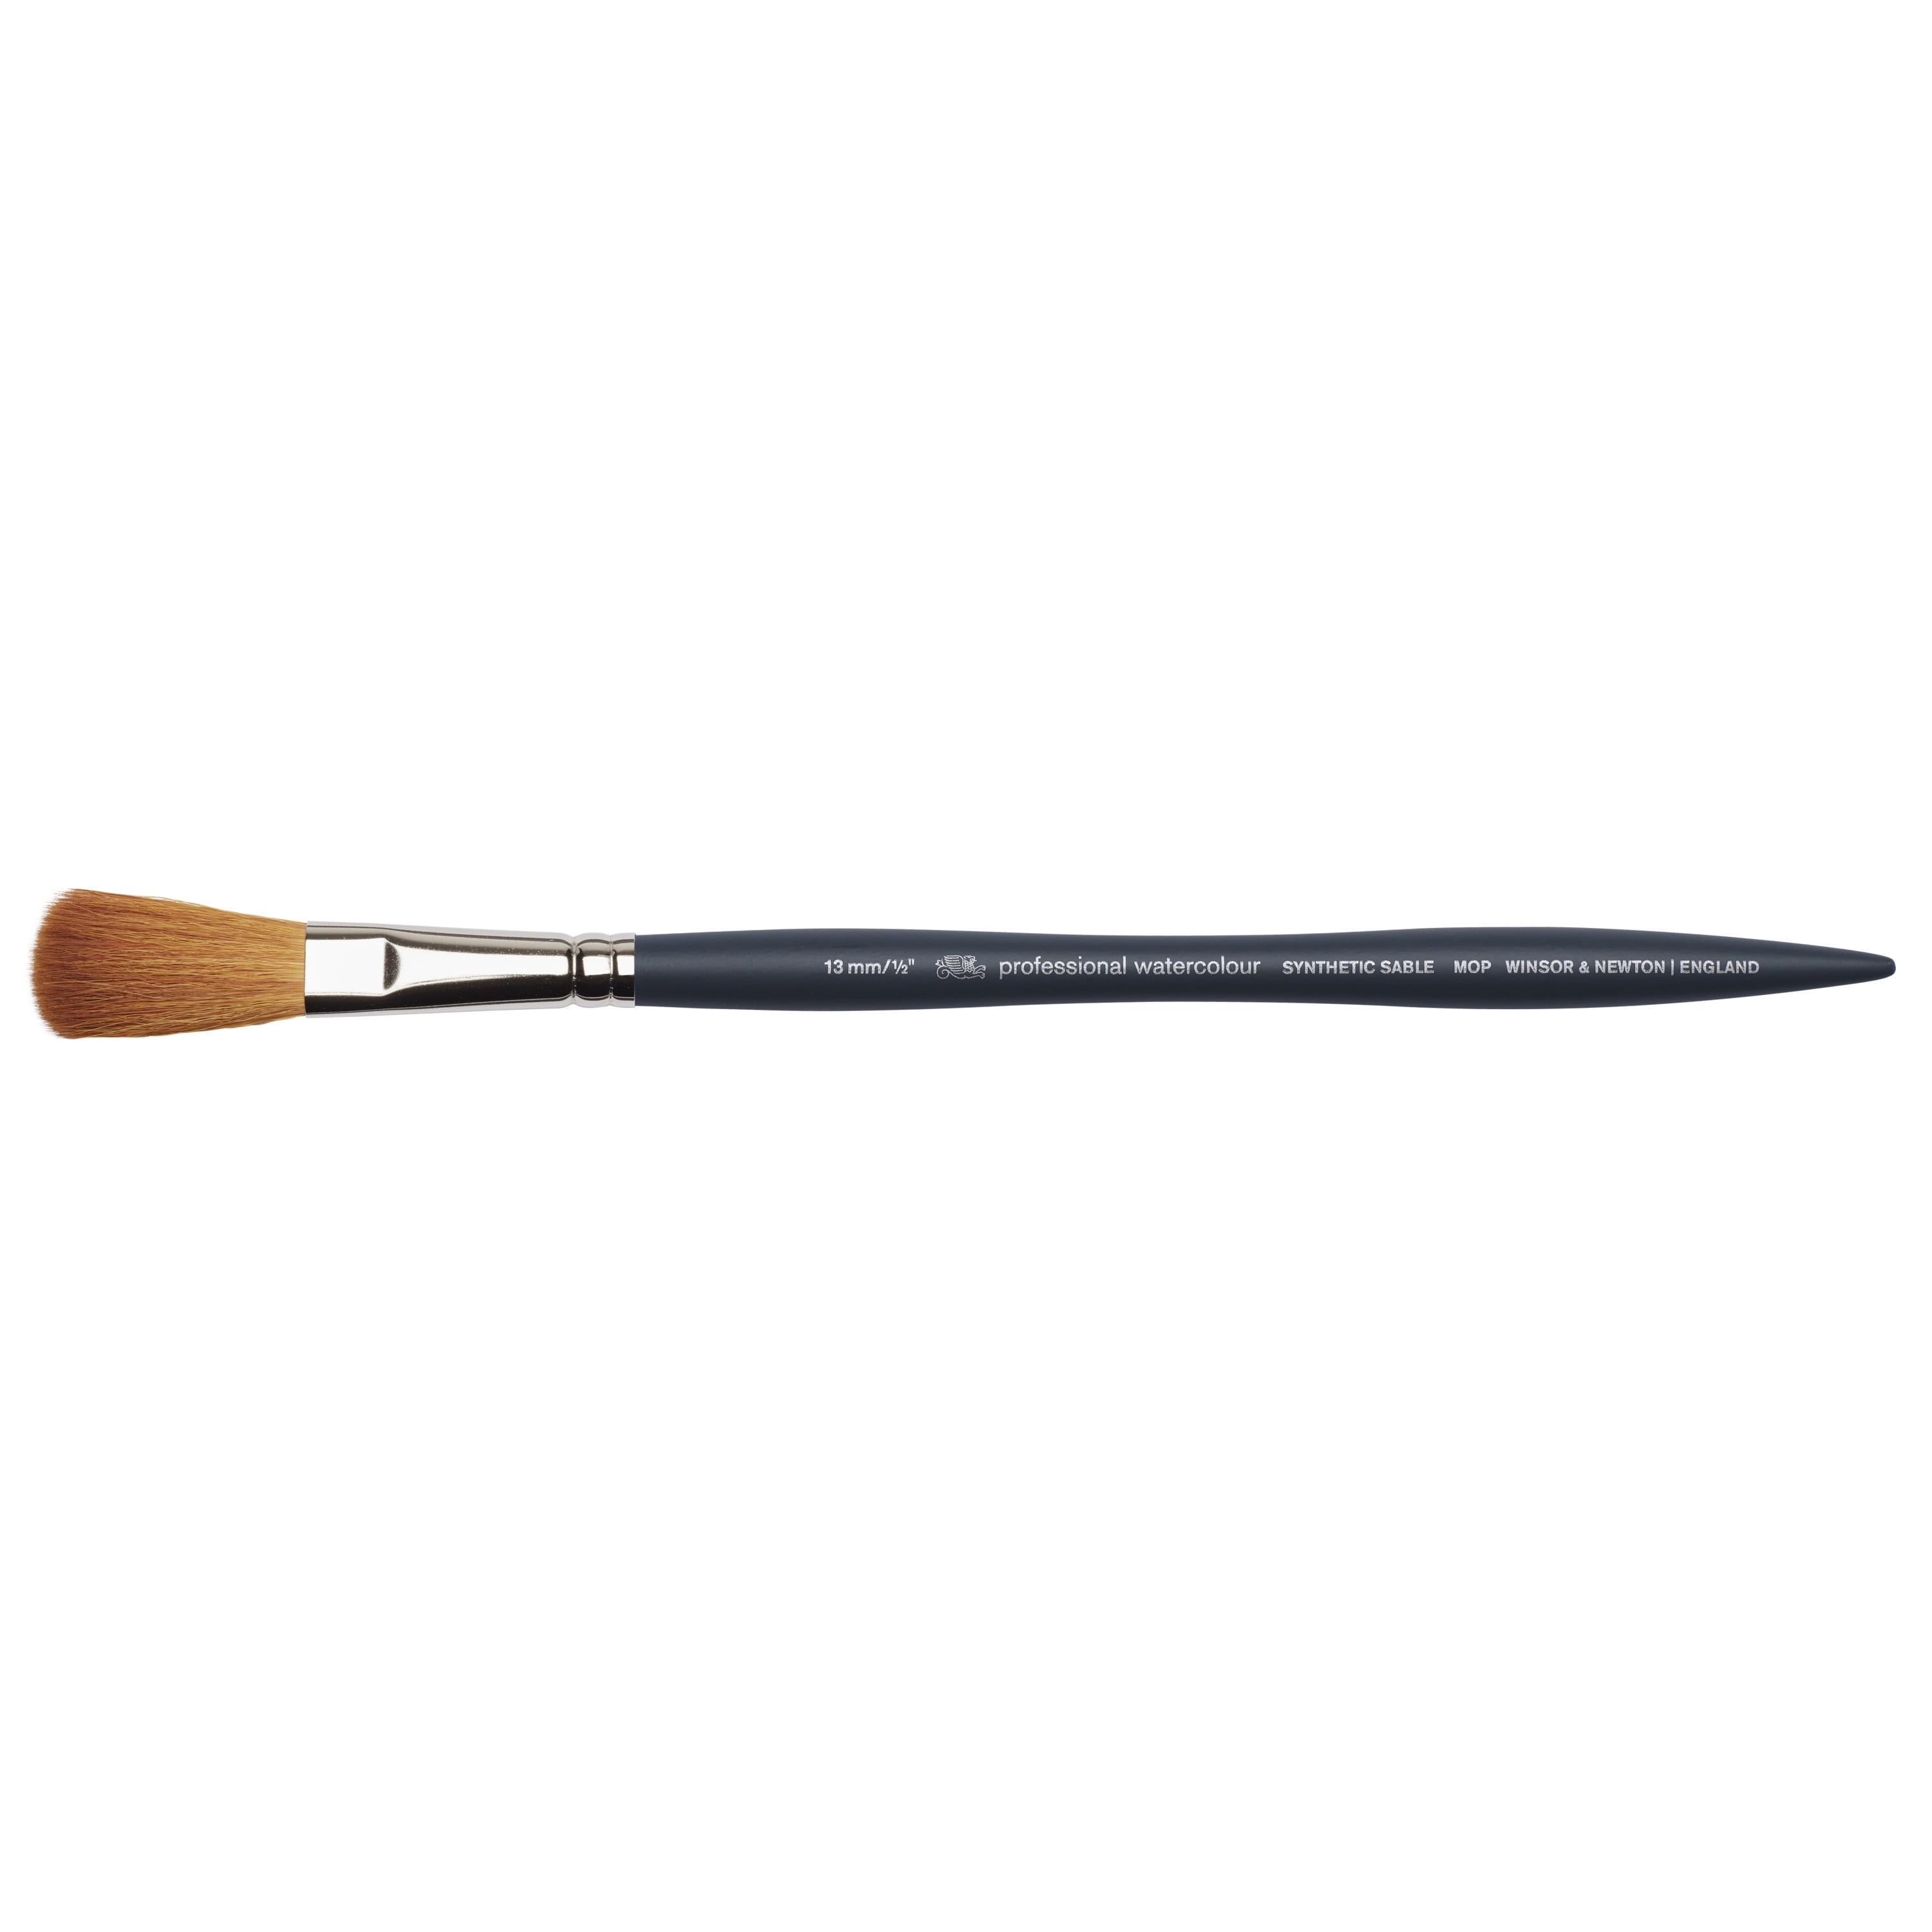 Winsor & Newton Professional Watercolor Synthetic Sable Brush, Mop, 1